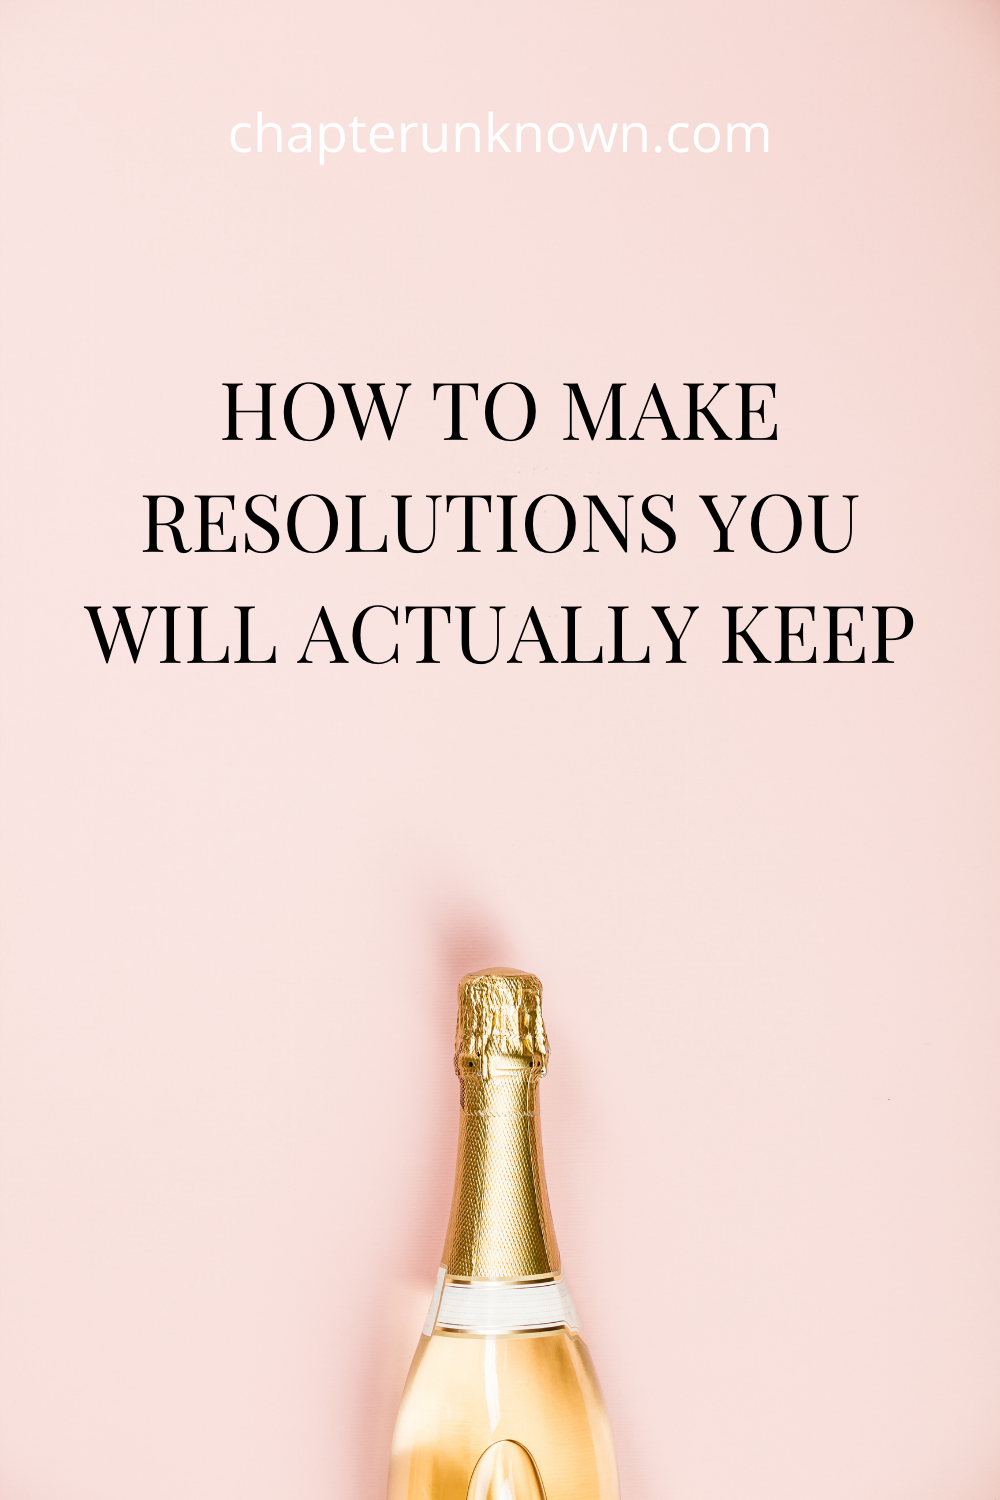 how to make resolutions you will actually keep